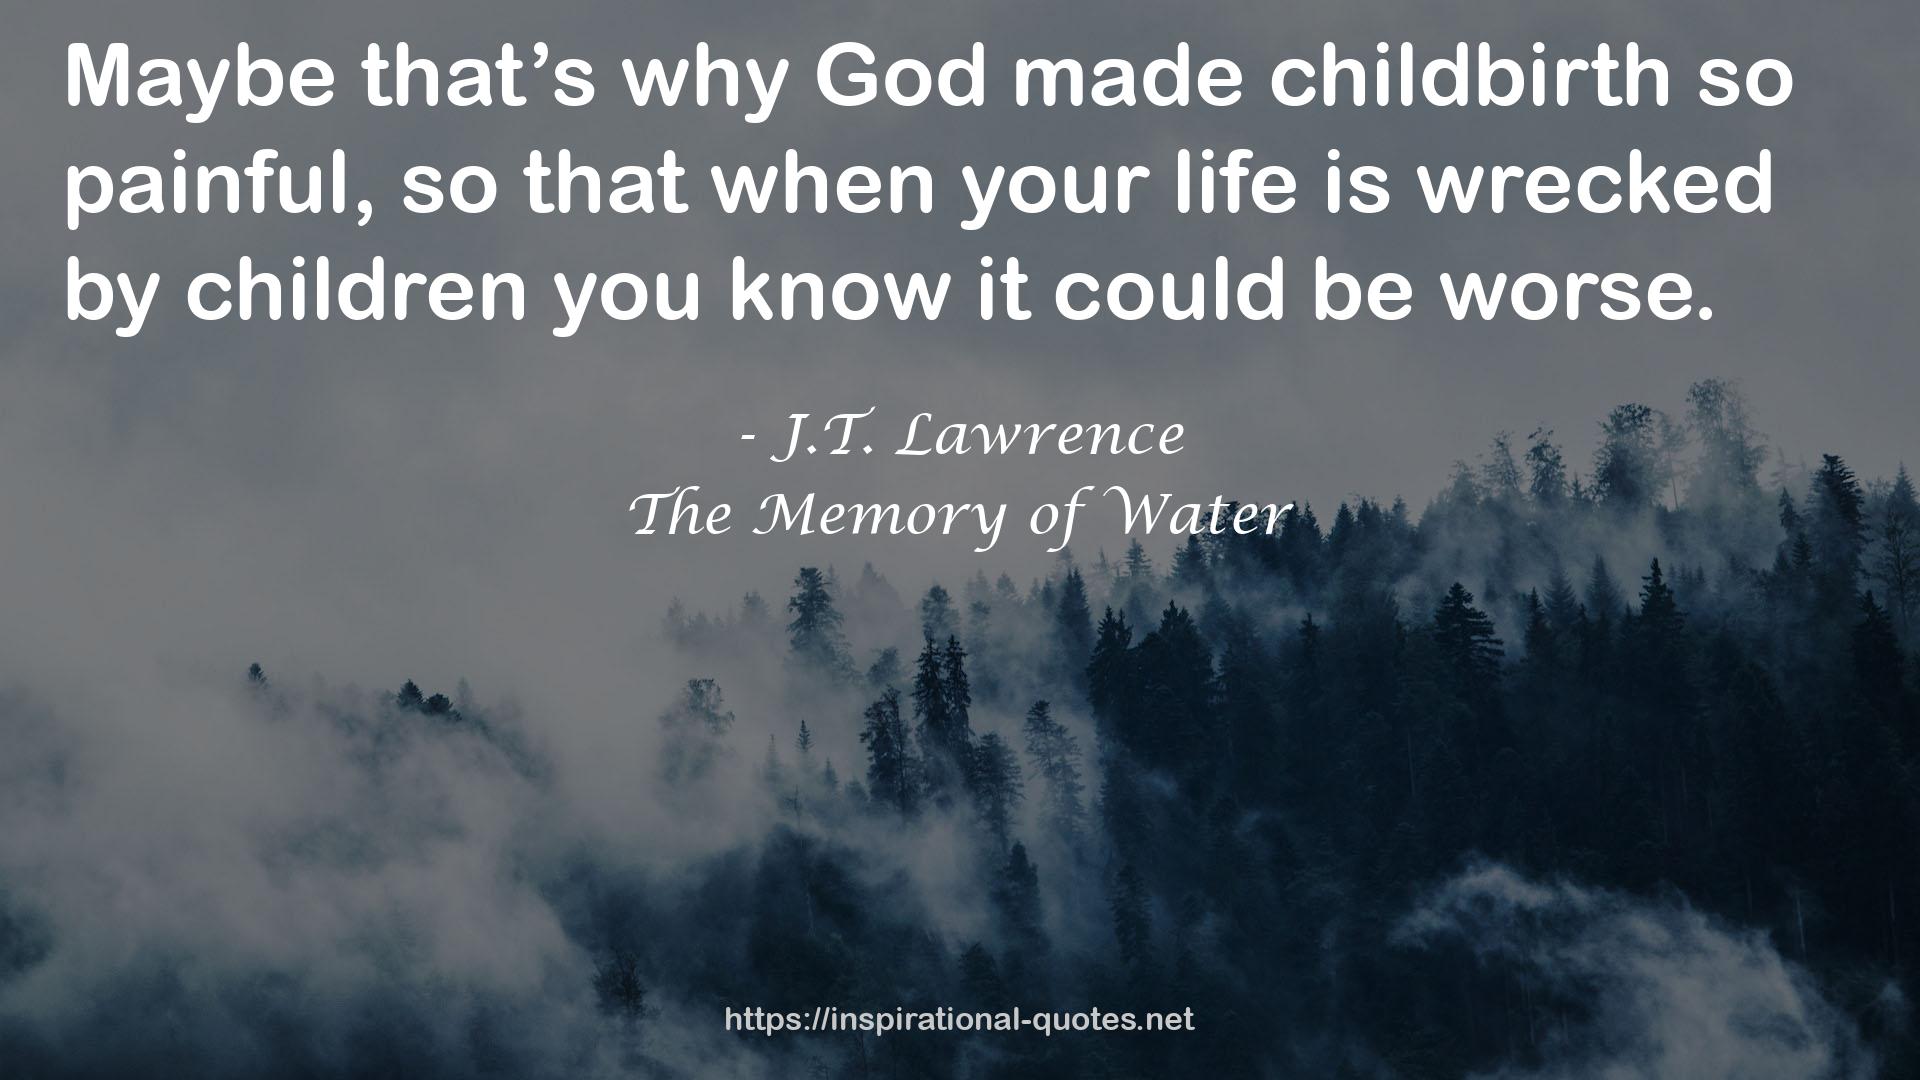 J.T. Lawrence QUOTES